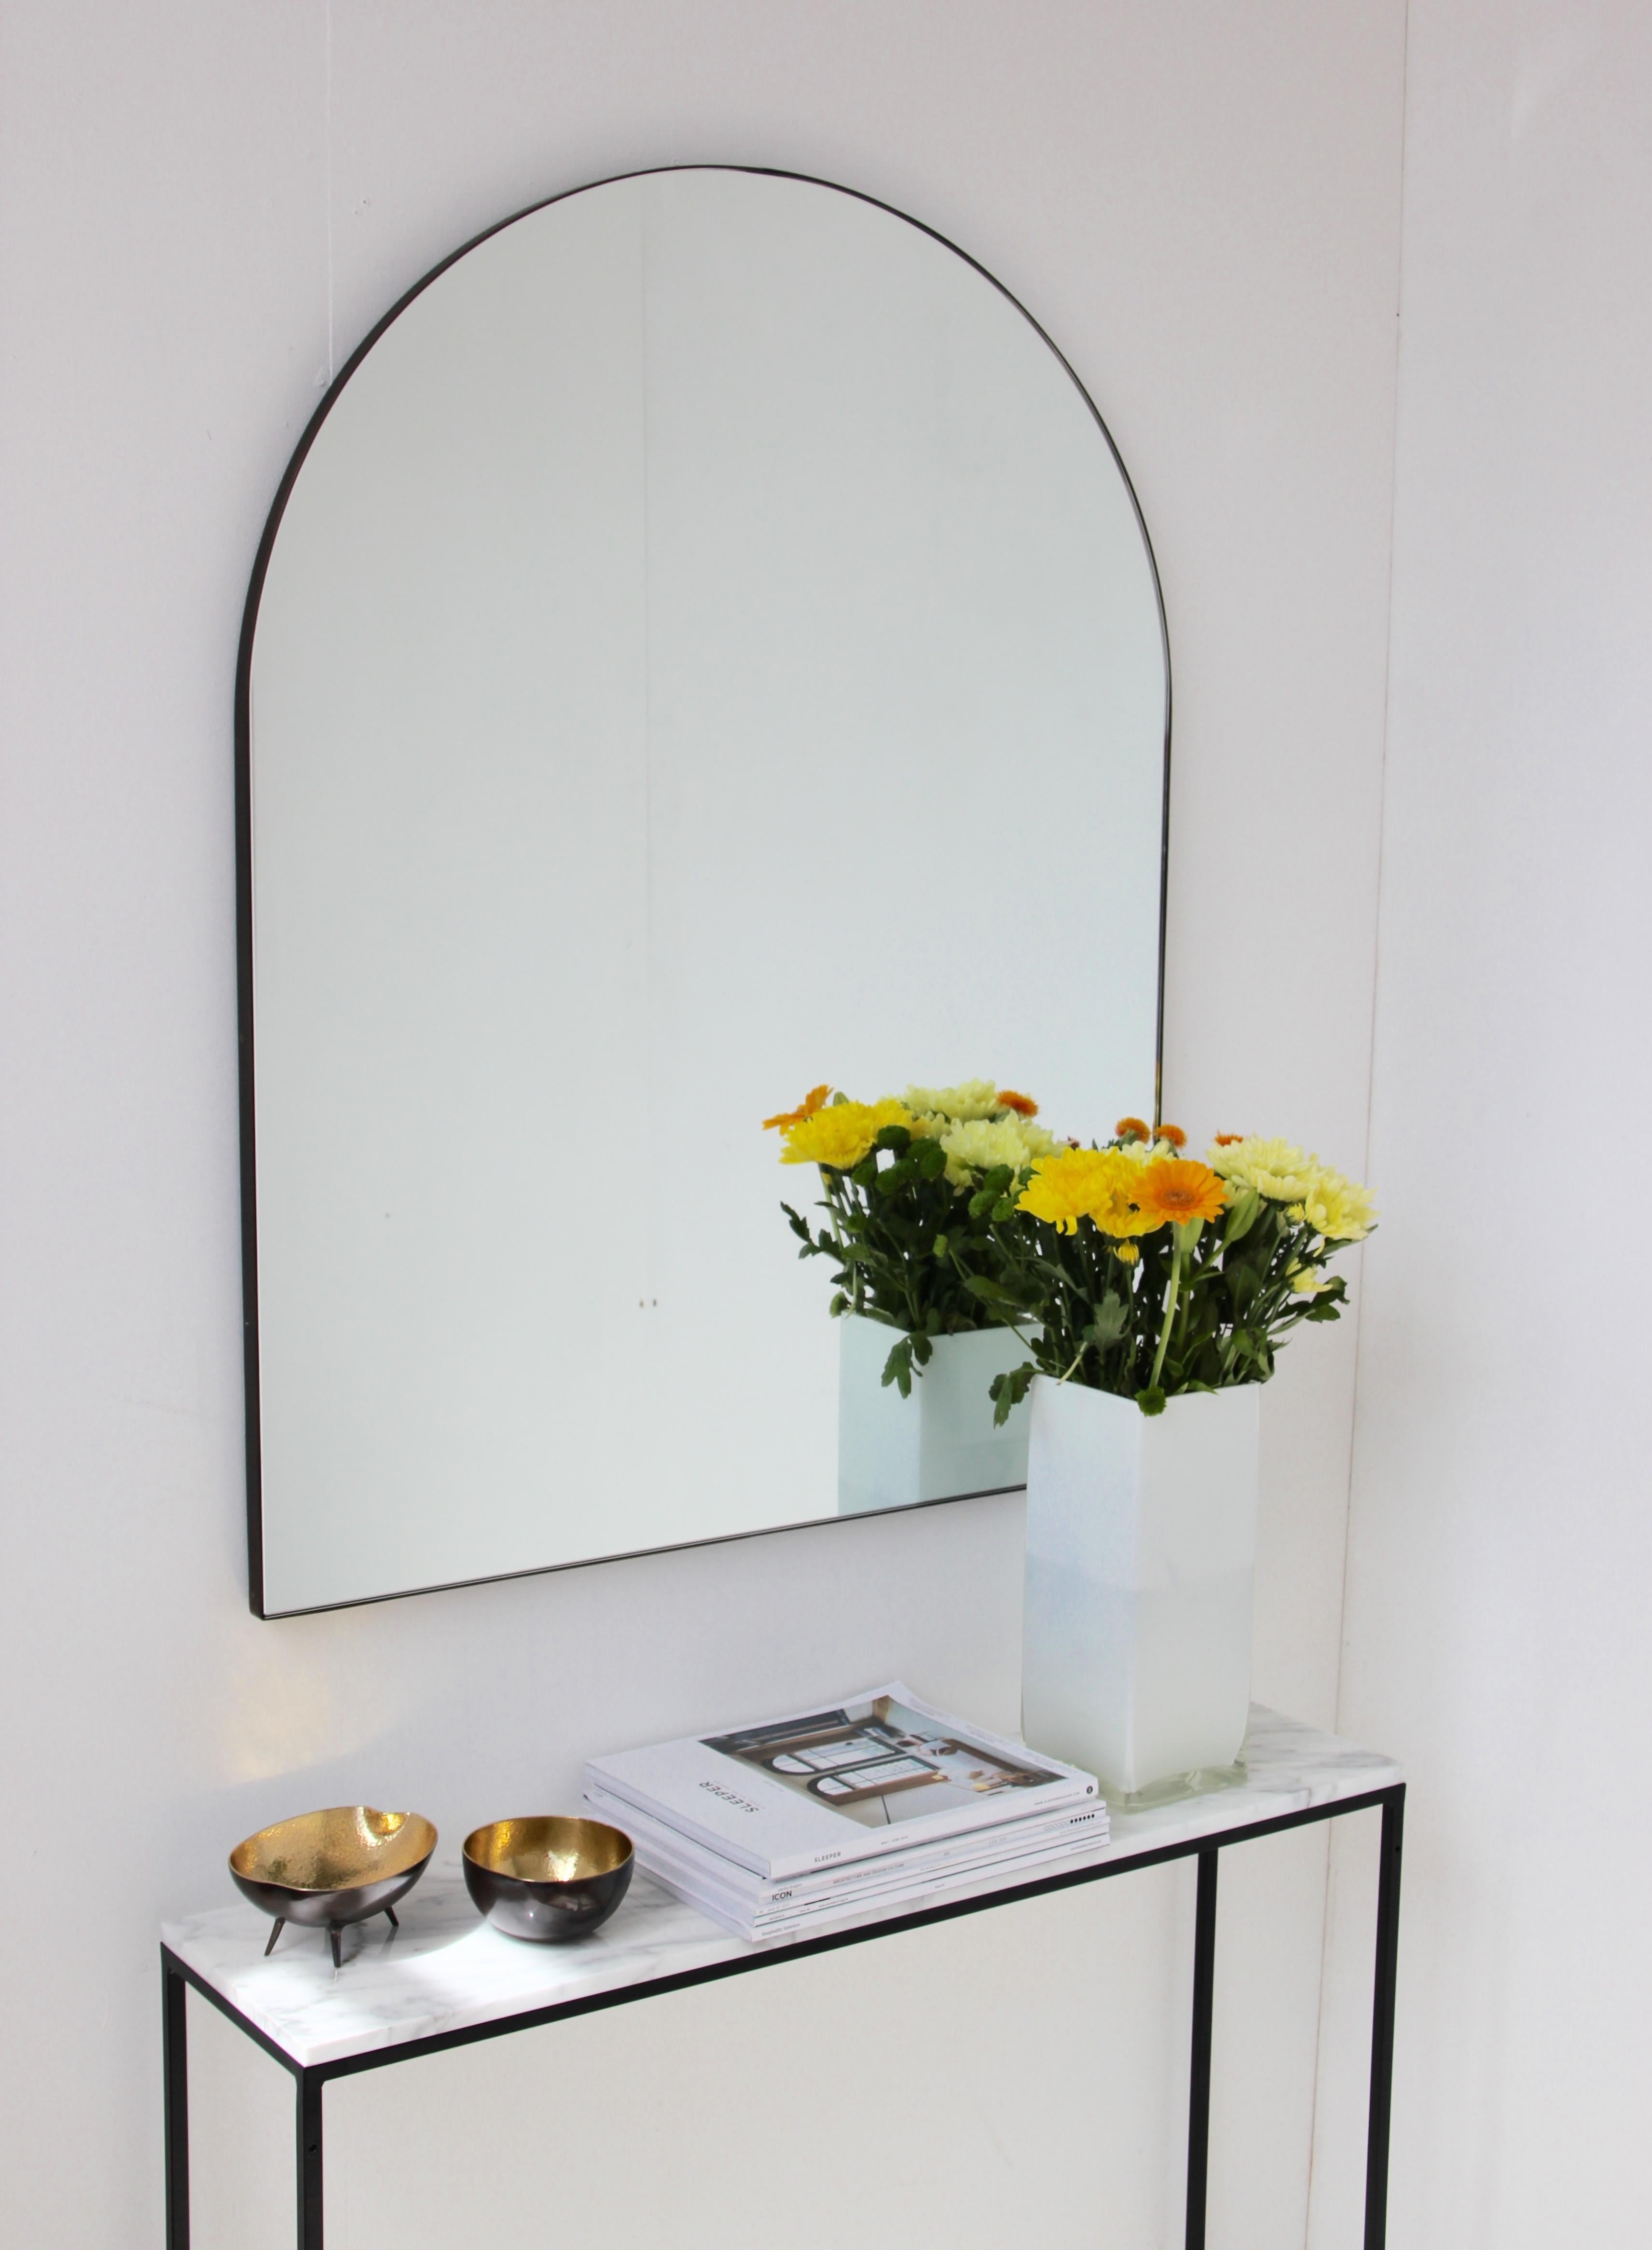 In Stock.

Delightful contemporary arched mirror with a brass patina frame. Designed and handcrafted in London, UK.

Dimensions: W 75 x H 95 x D 1.8cm / w 29.5'' x h 37.4'' x d 0.7'', or any bespoke size.

Fitted with an ingenious French cleat